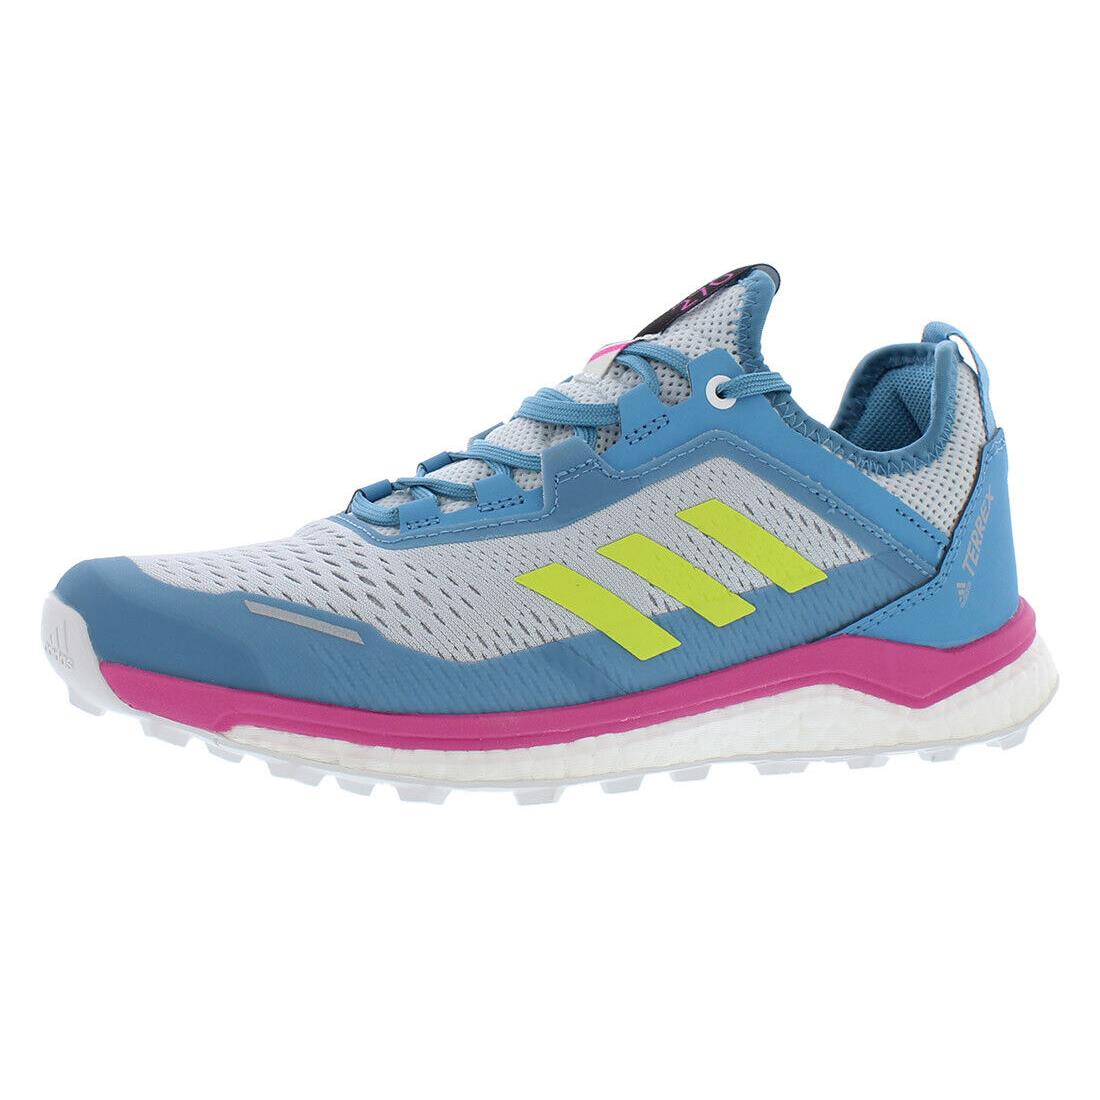 Adidas Terrex Agravic Flow Womens Shoes Size 10 Color: Hazy - Hazy Blue/Yellow/Crystal White, Main: Blue